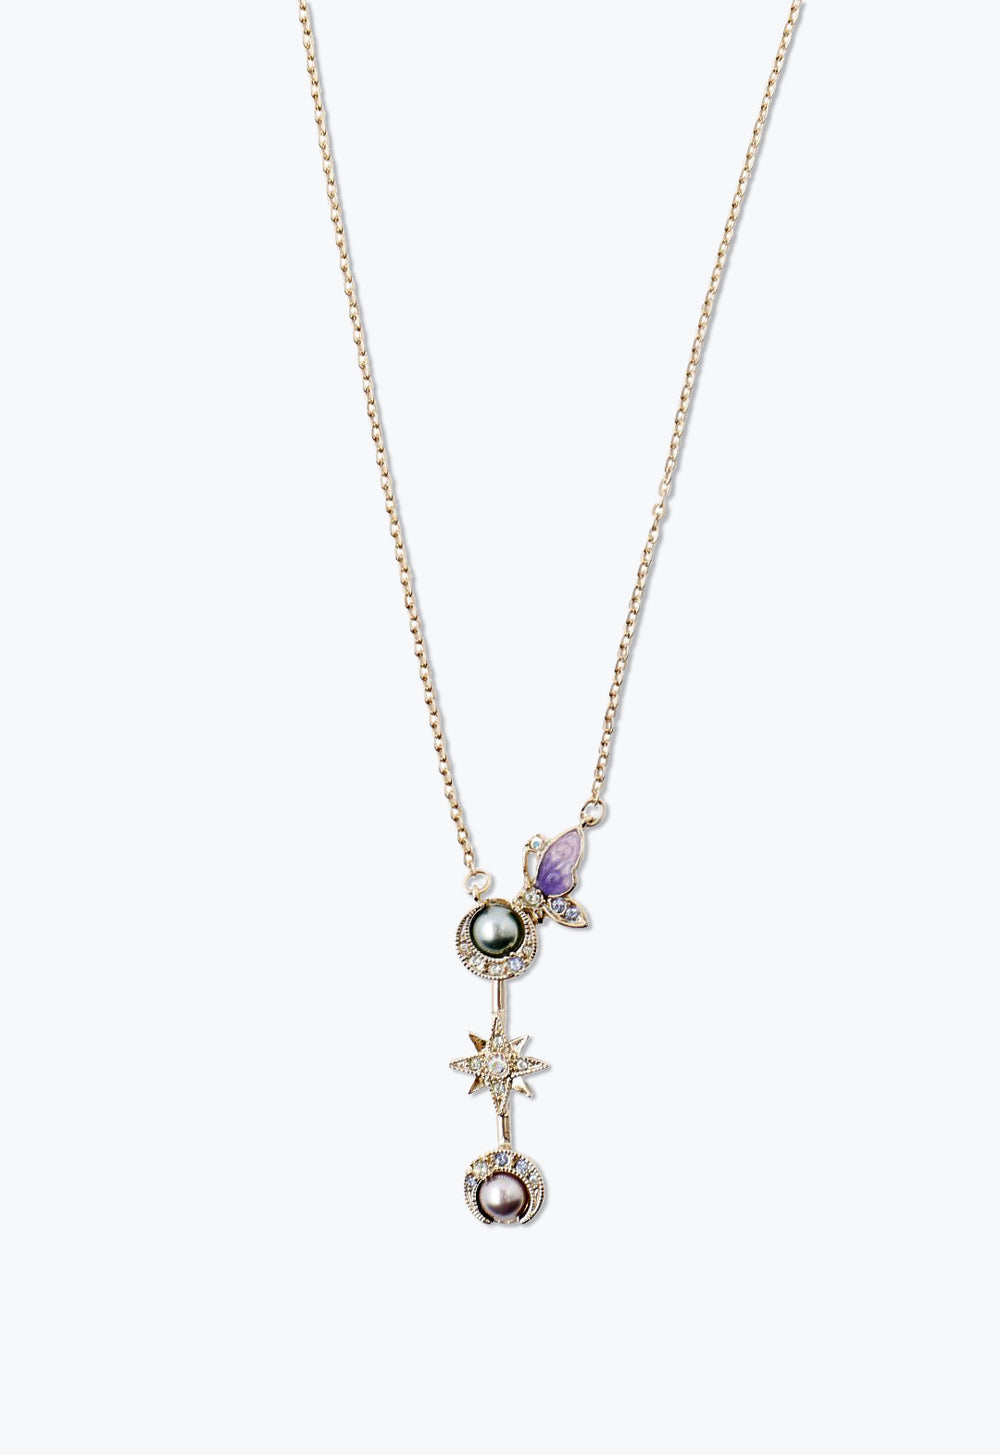 Lavender butterfly with gems, pearl on a crescent up, a star-shaped, pearl on a crescent down